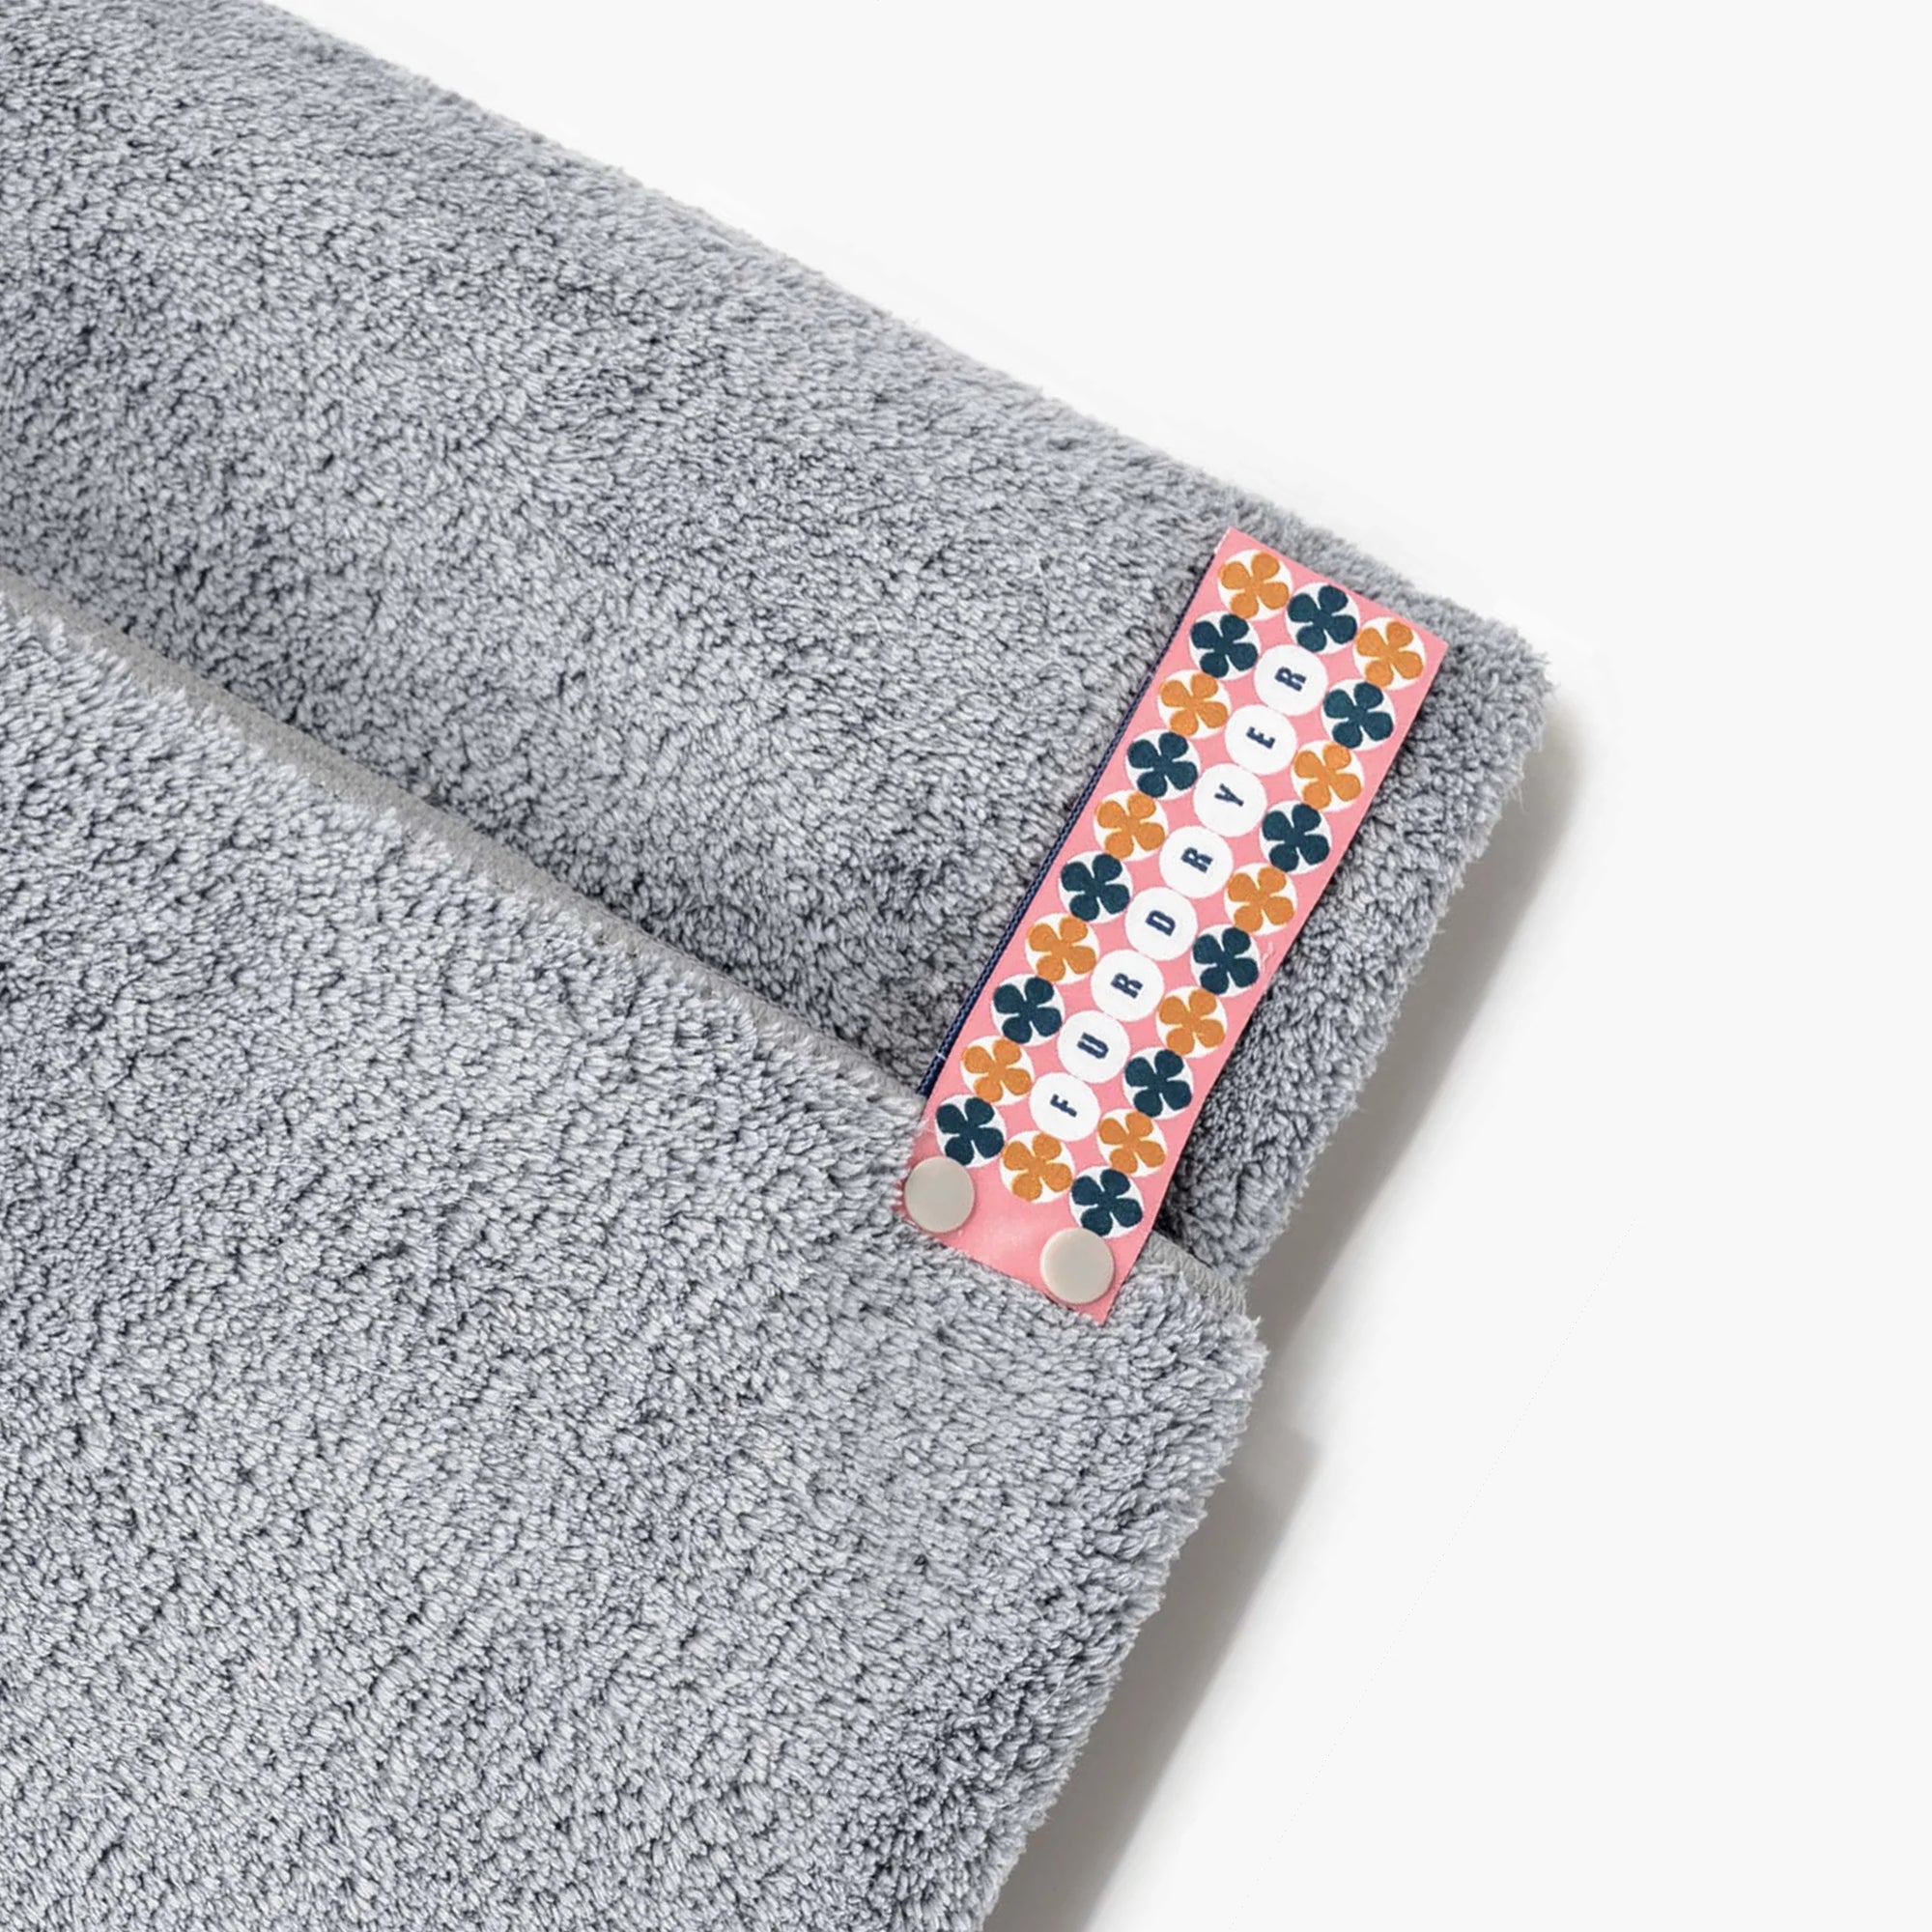 Close-up of a soft, fluffy grey dog towel with a charming floral and geometric patterned tag. The tag adds a touch of whimsy and design detail, making this absorbent towel not just a pet care necessity but also a delightful accessory for your furry friend's bath time.